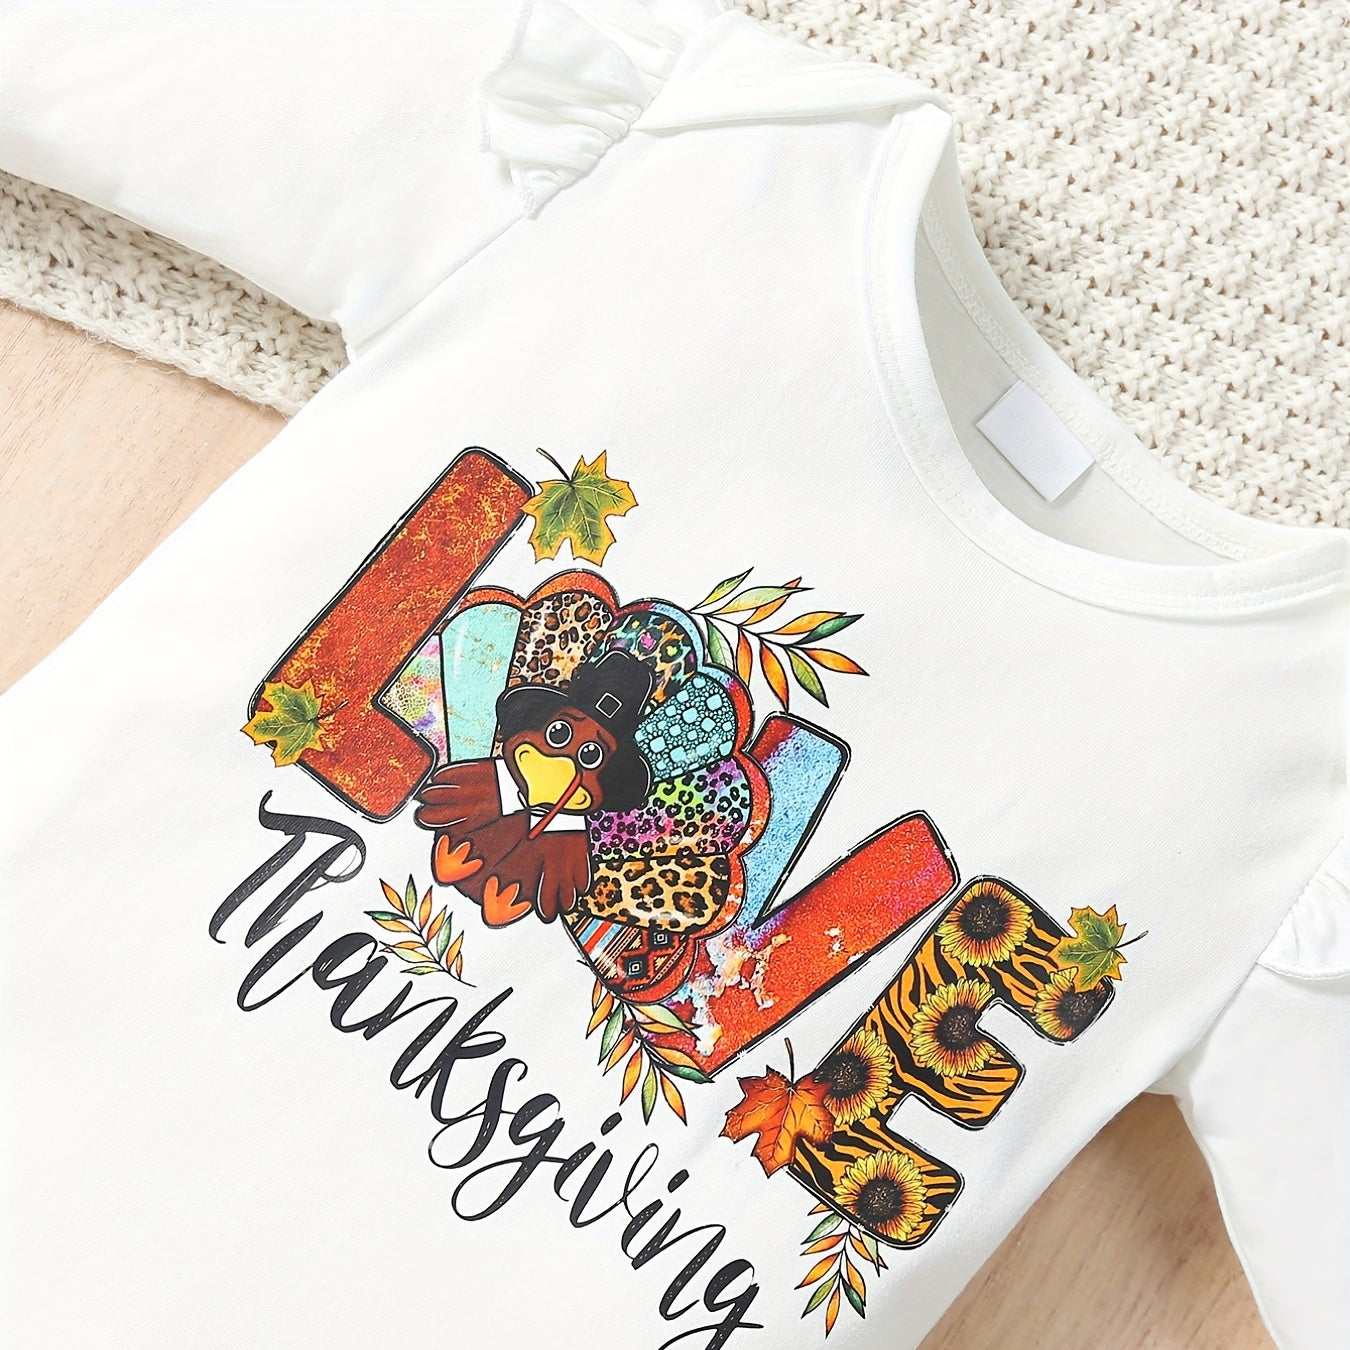 3PCS Love Thanksgiving Letter Turkey And Leaf Printed Baby Set